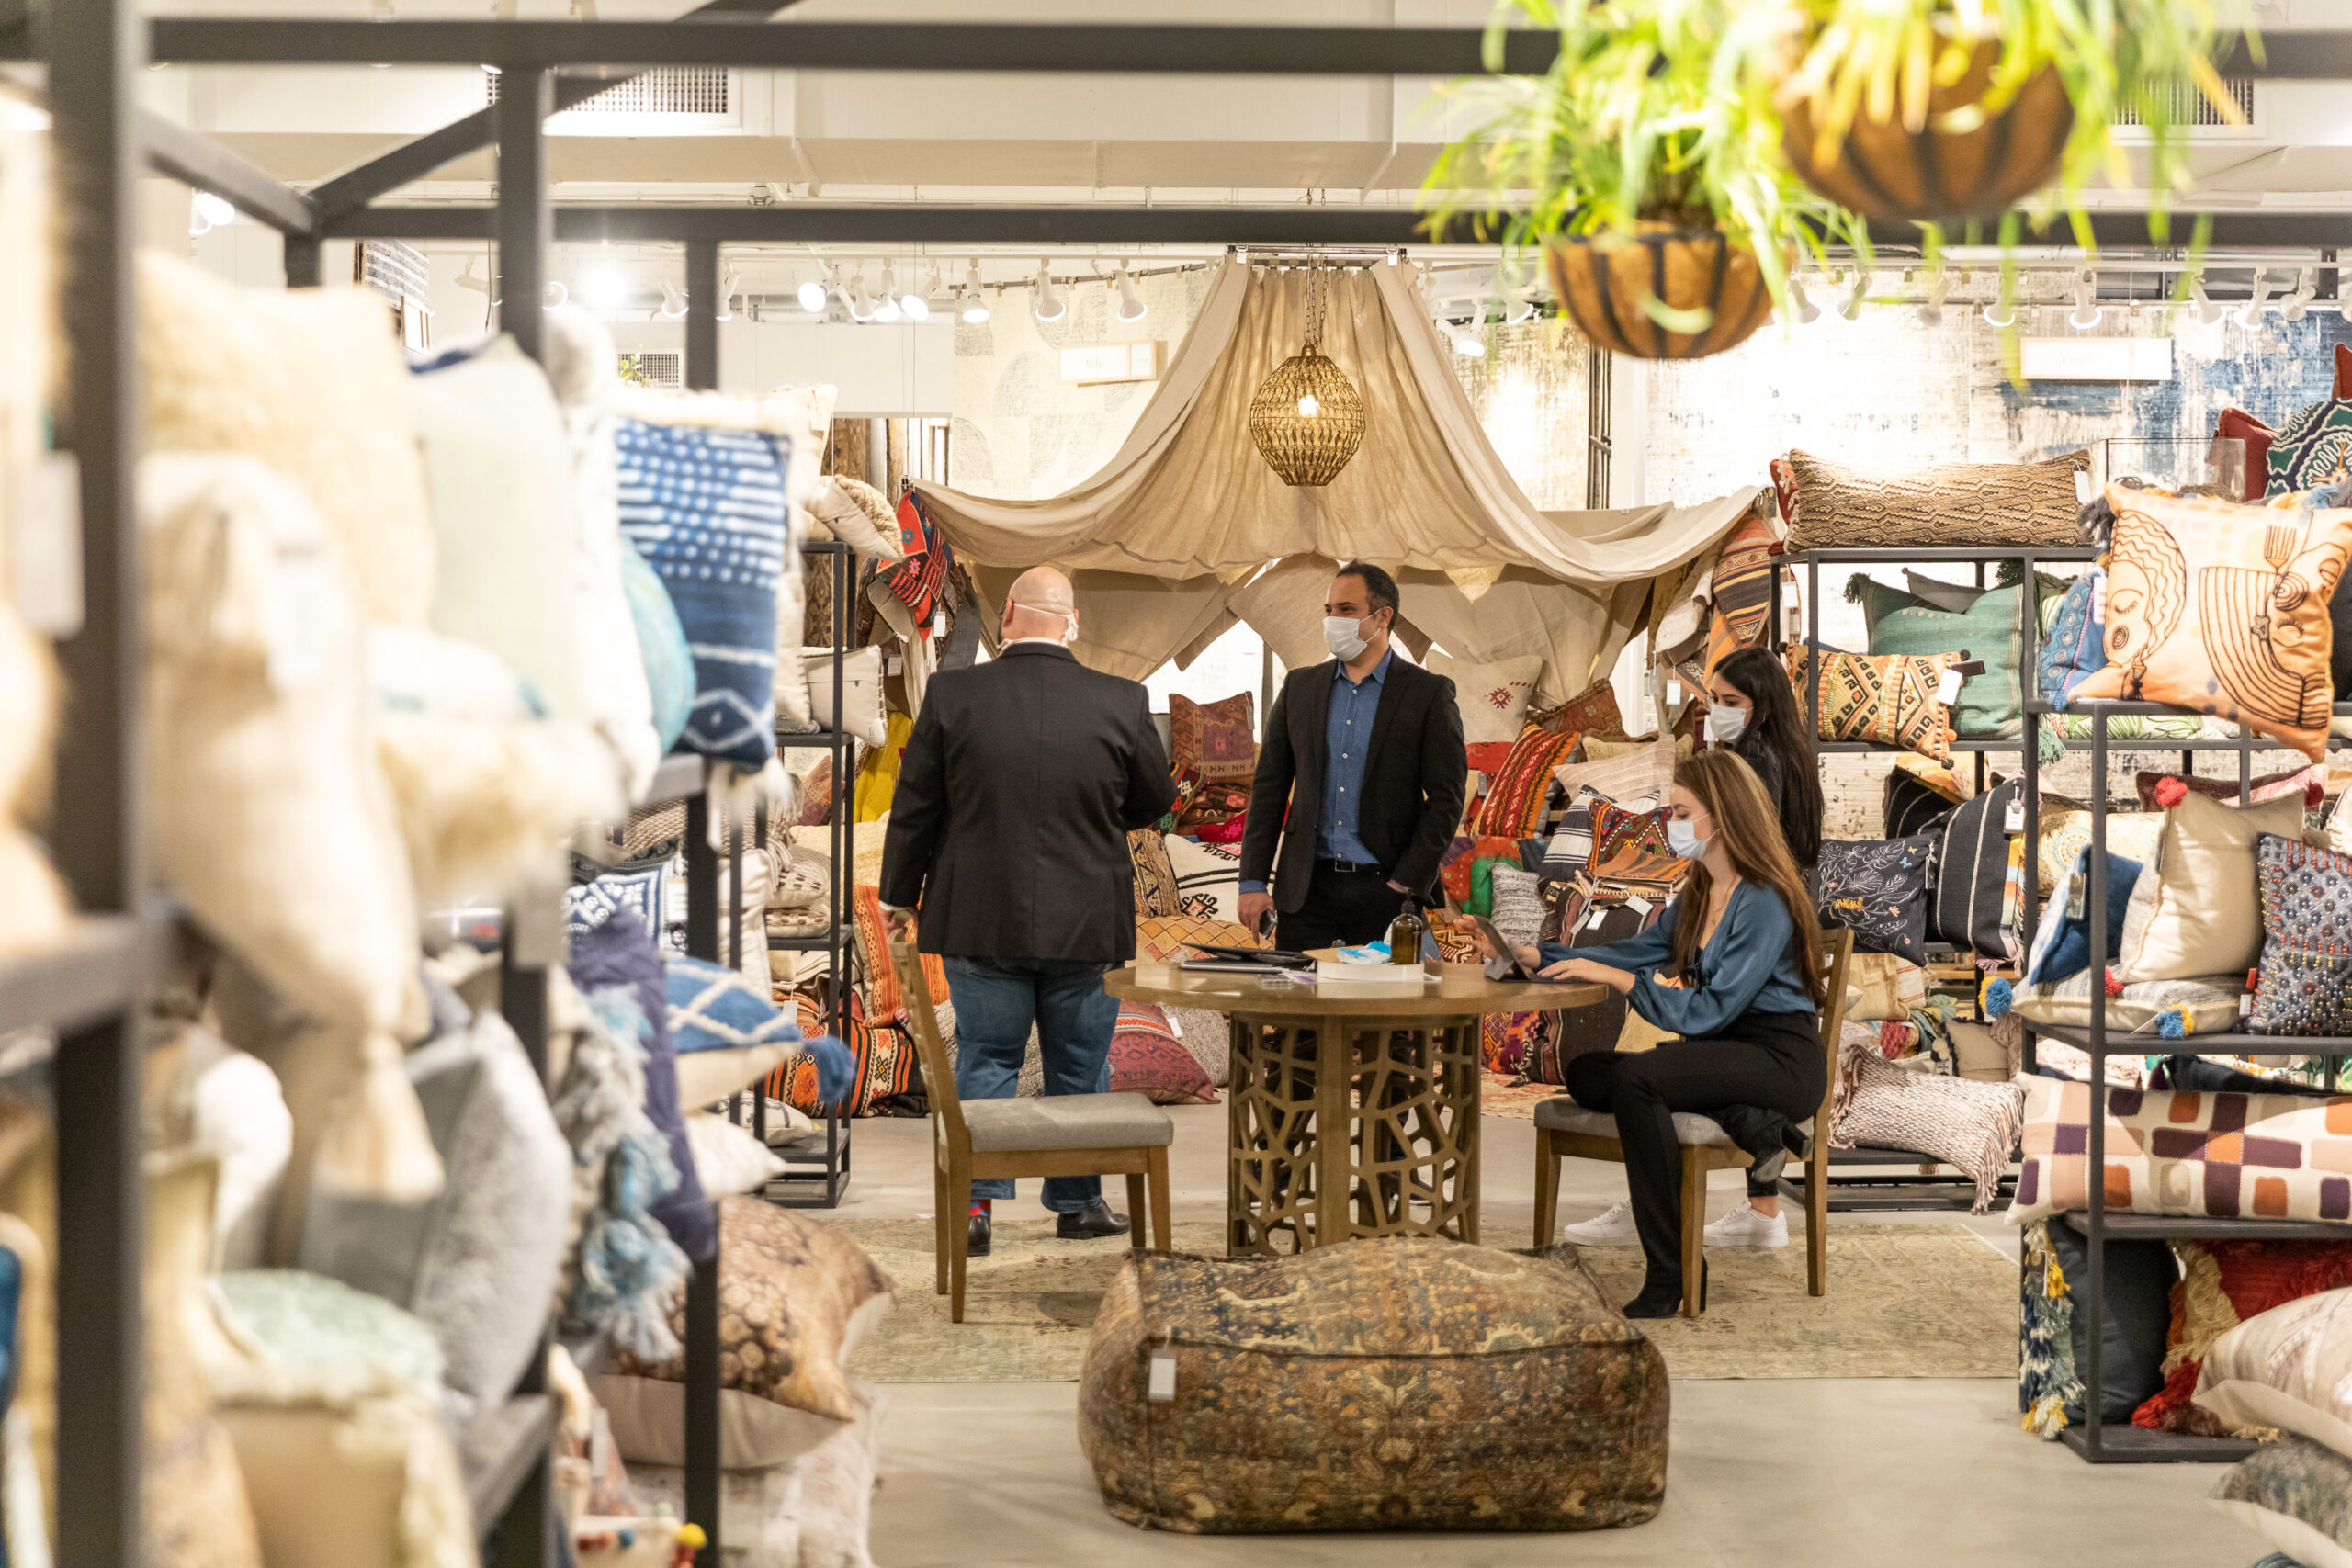 A group of shoppers shop at furniture showrooms in High Point, NC for High Point Market.